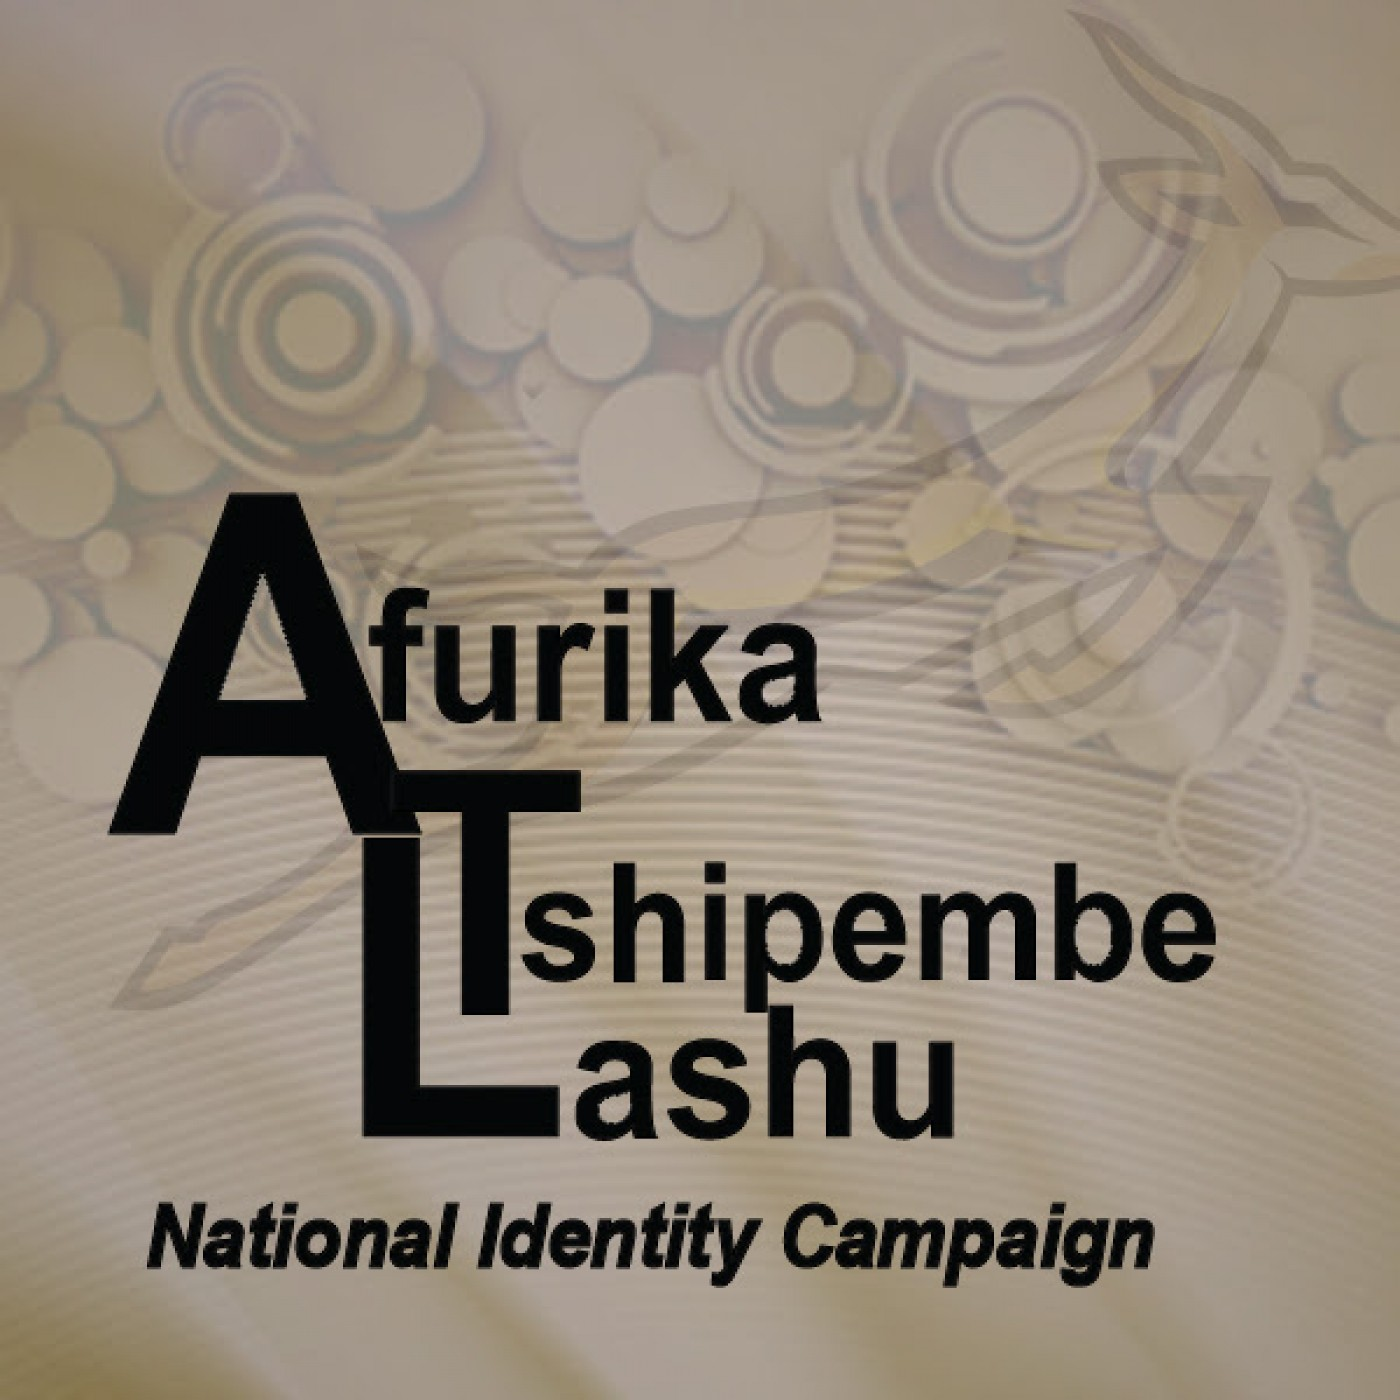 National Identity Campaign - Afrikaans Filler